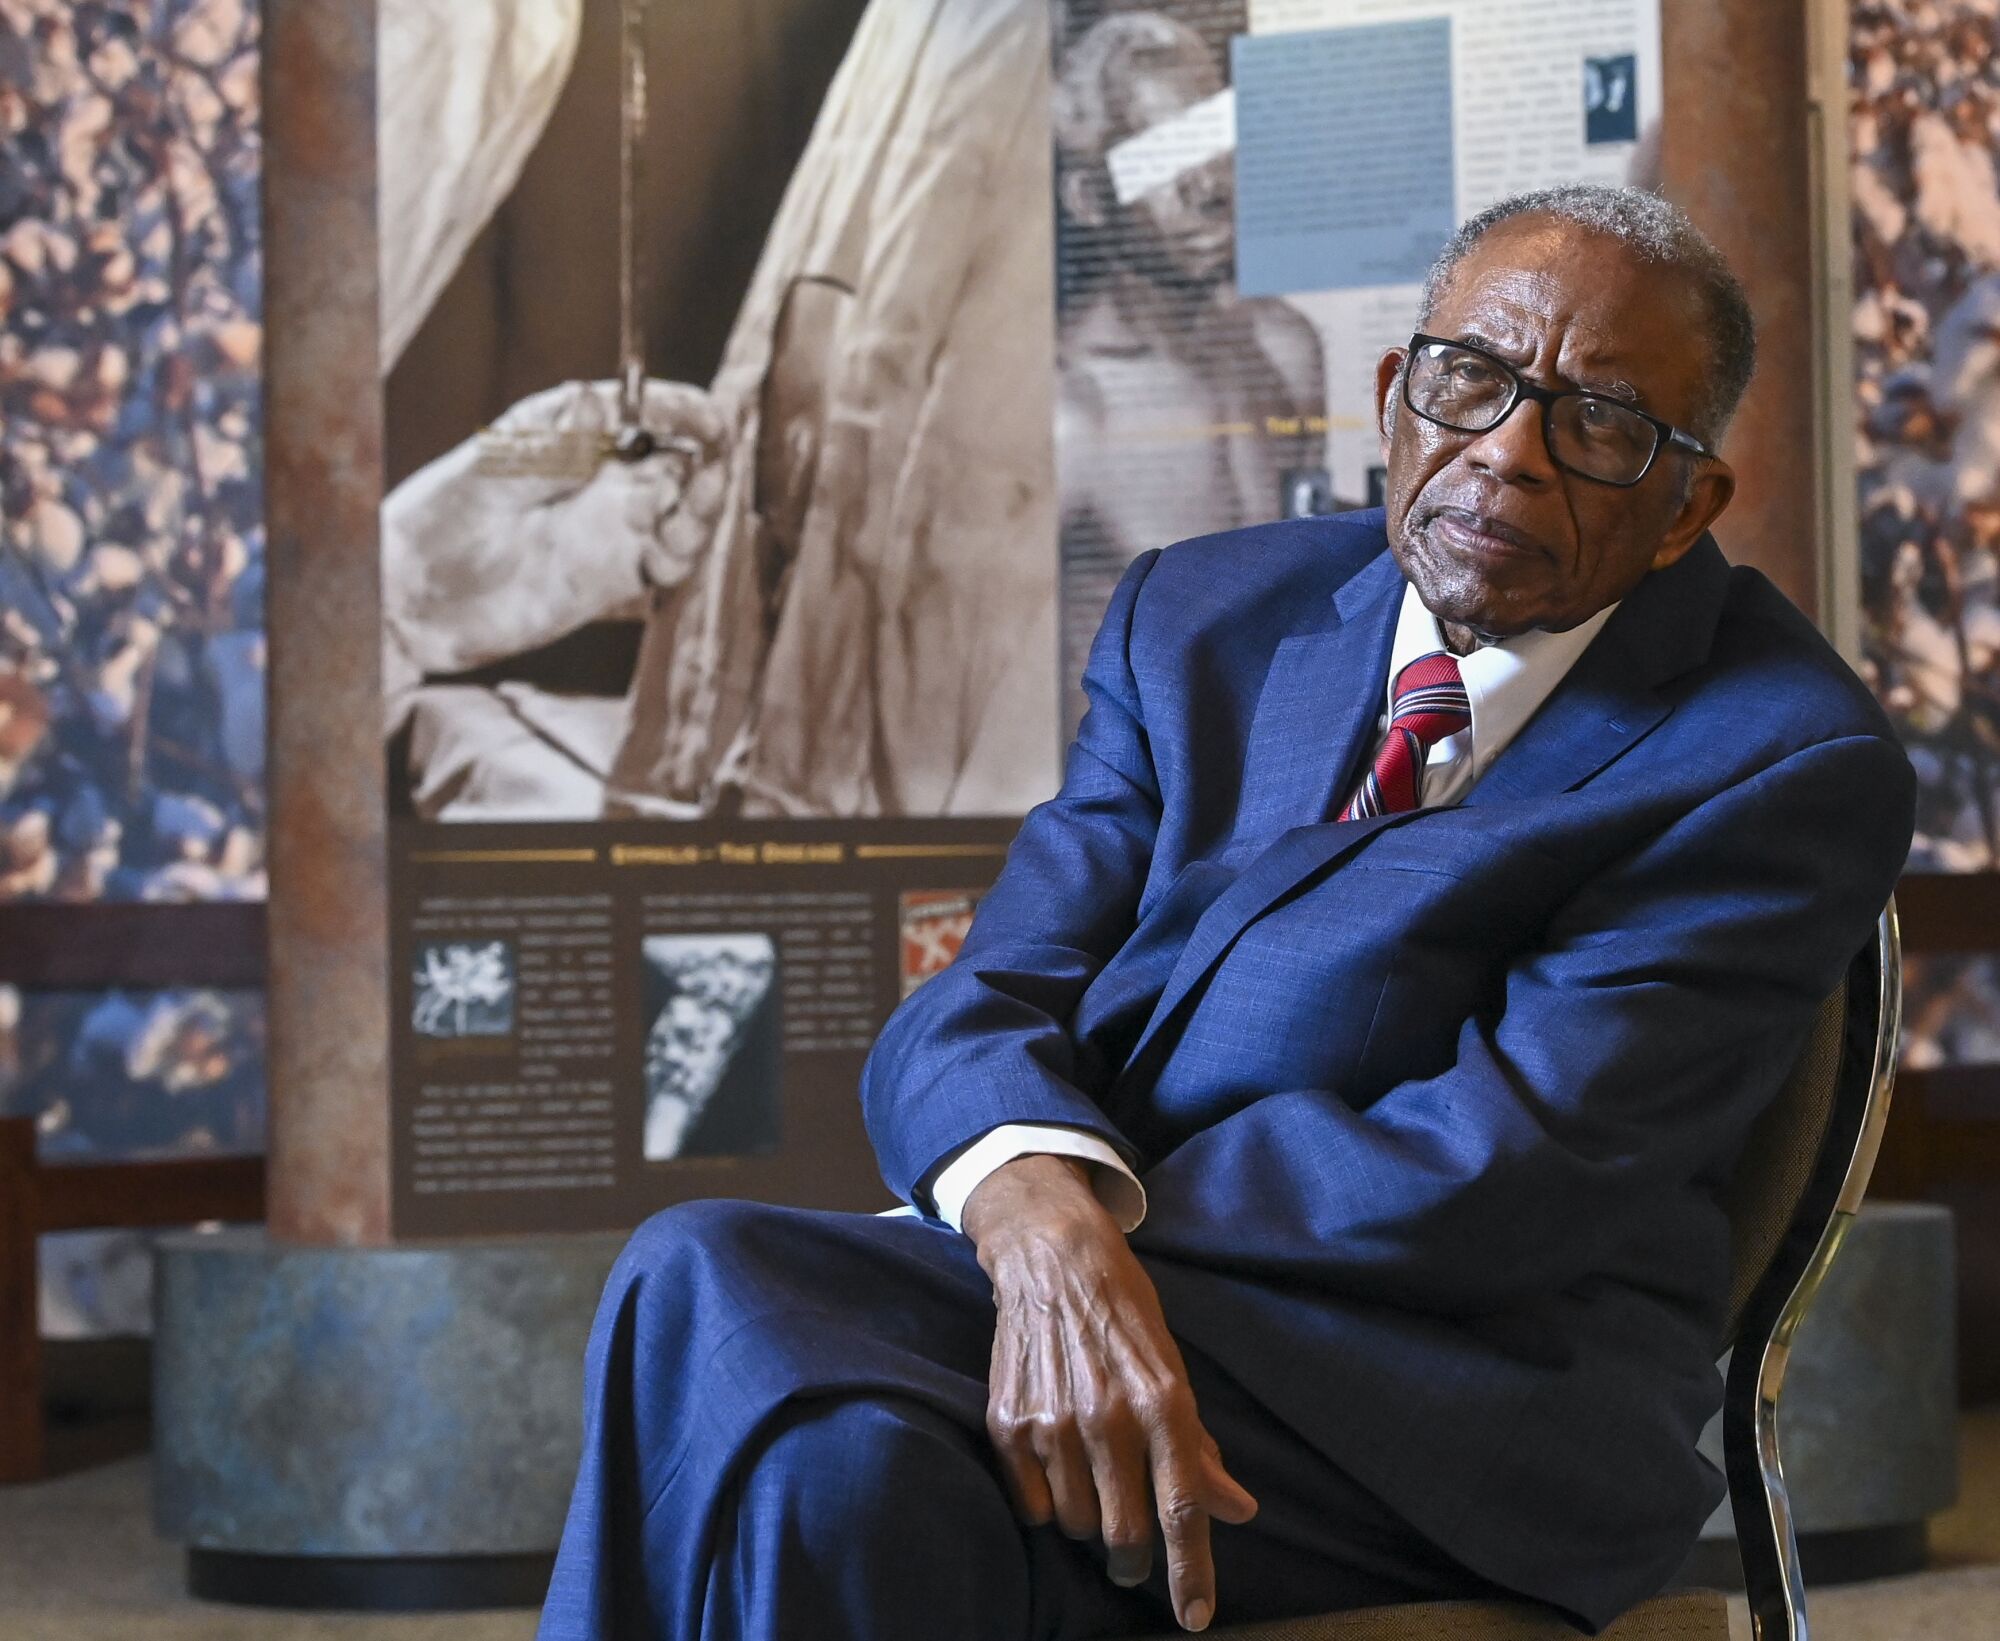 Civil rights attorney Fred Gray seated at a museum.